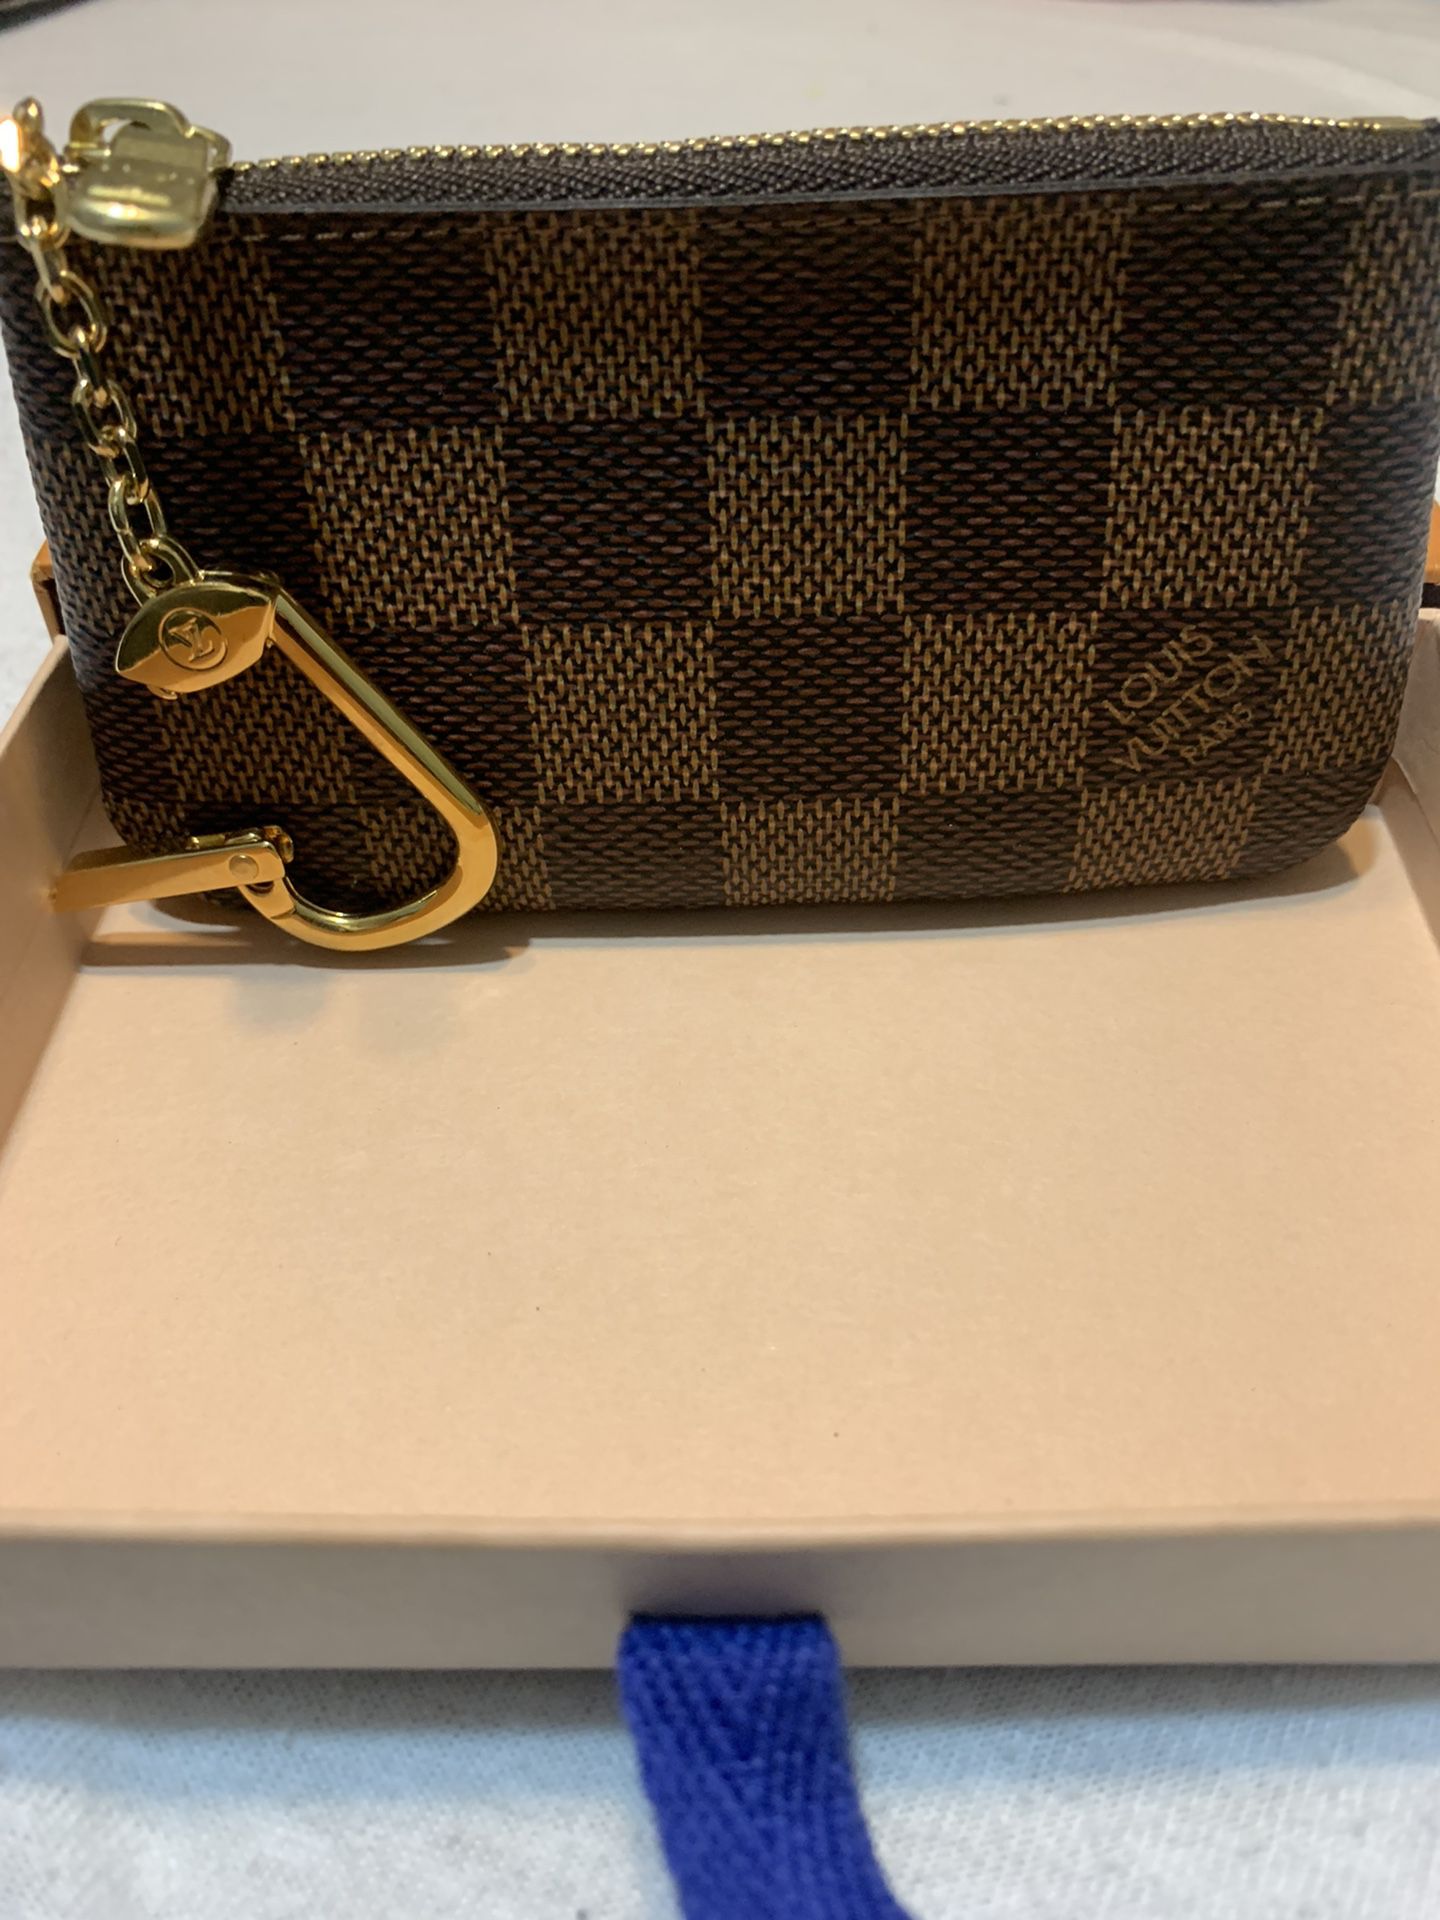 AUTHENTiC LOUiS VUiTTON for Sale in Ind Crk Vlg, FL - OfferUp